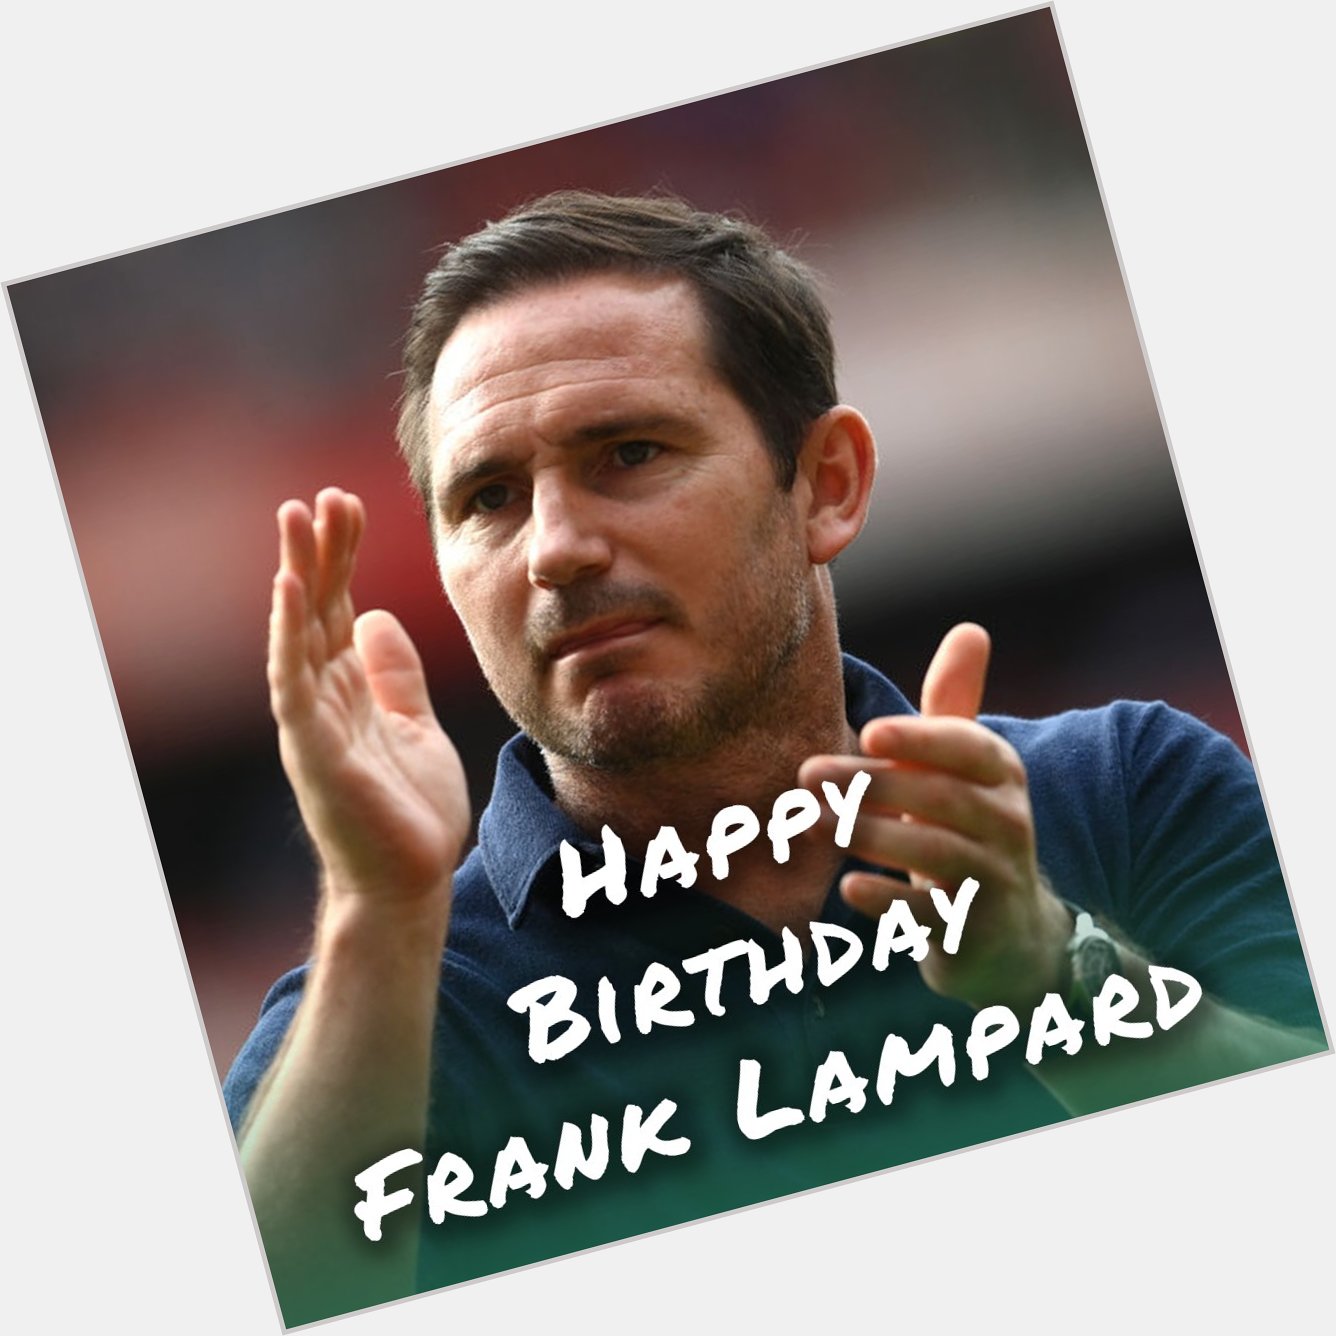 Happy birthday Frank Lampard! He always delivered some gifts in his Chelsea press conferences 